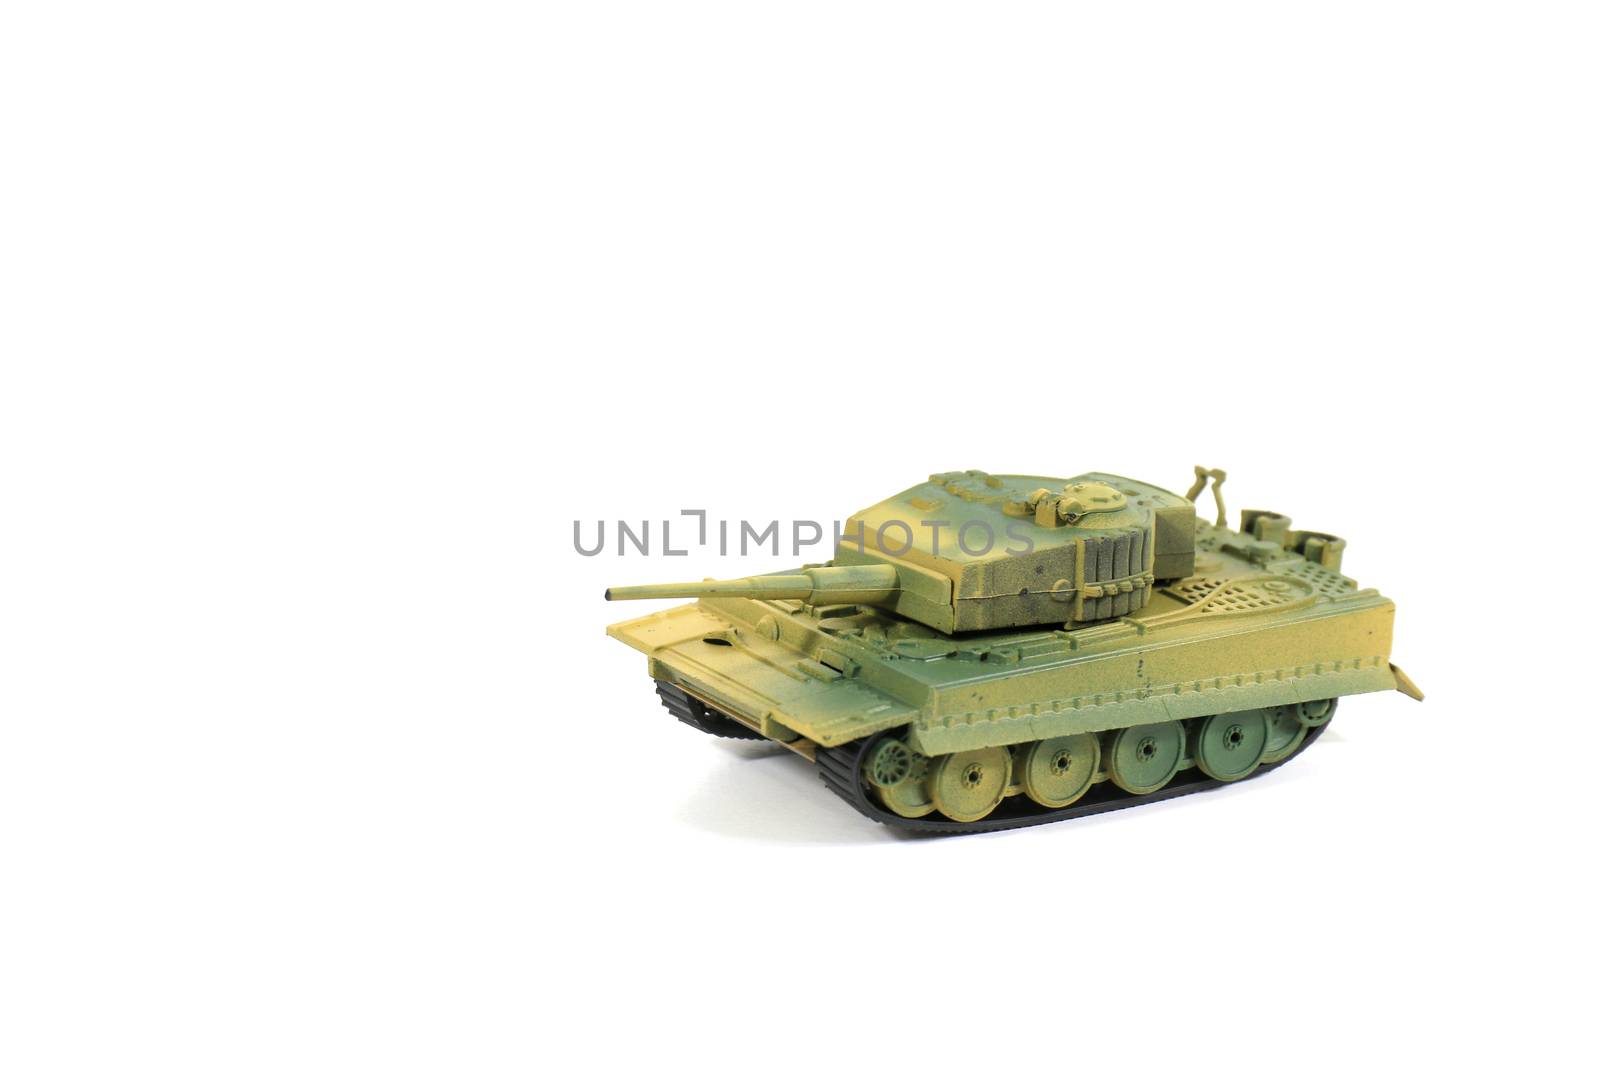 Toys Tank plastic on white background, War, fight army soldier tank Sample picture or War scenario concept